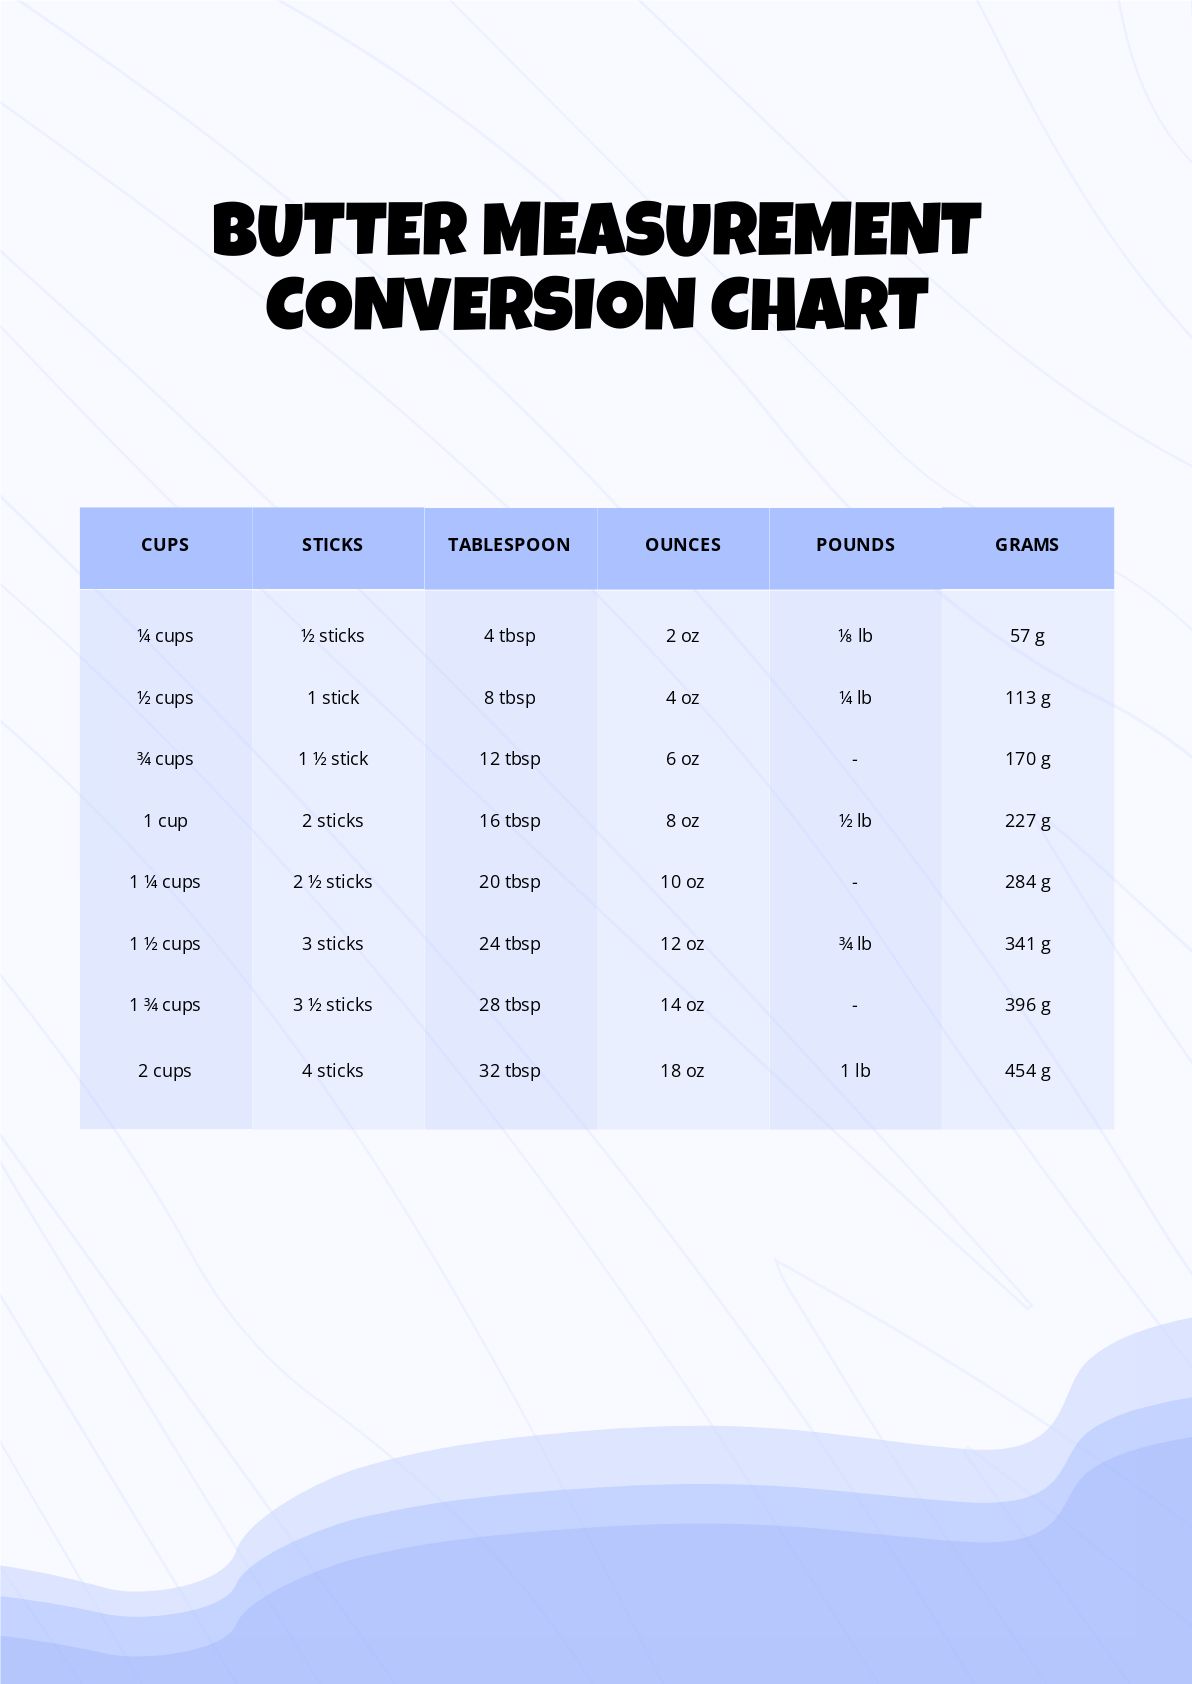 Free Butter Measurement Conversion Chart in PDF